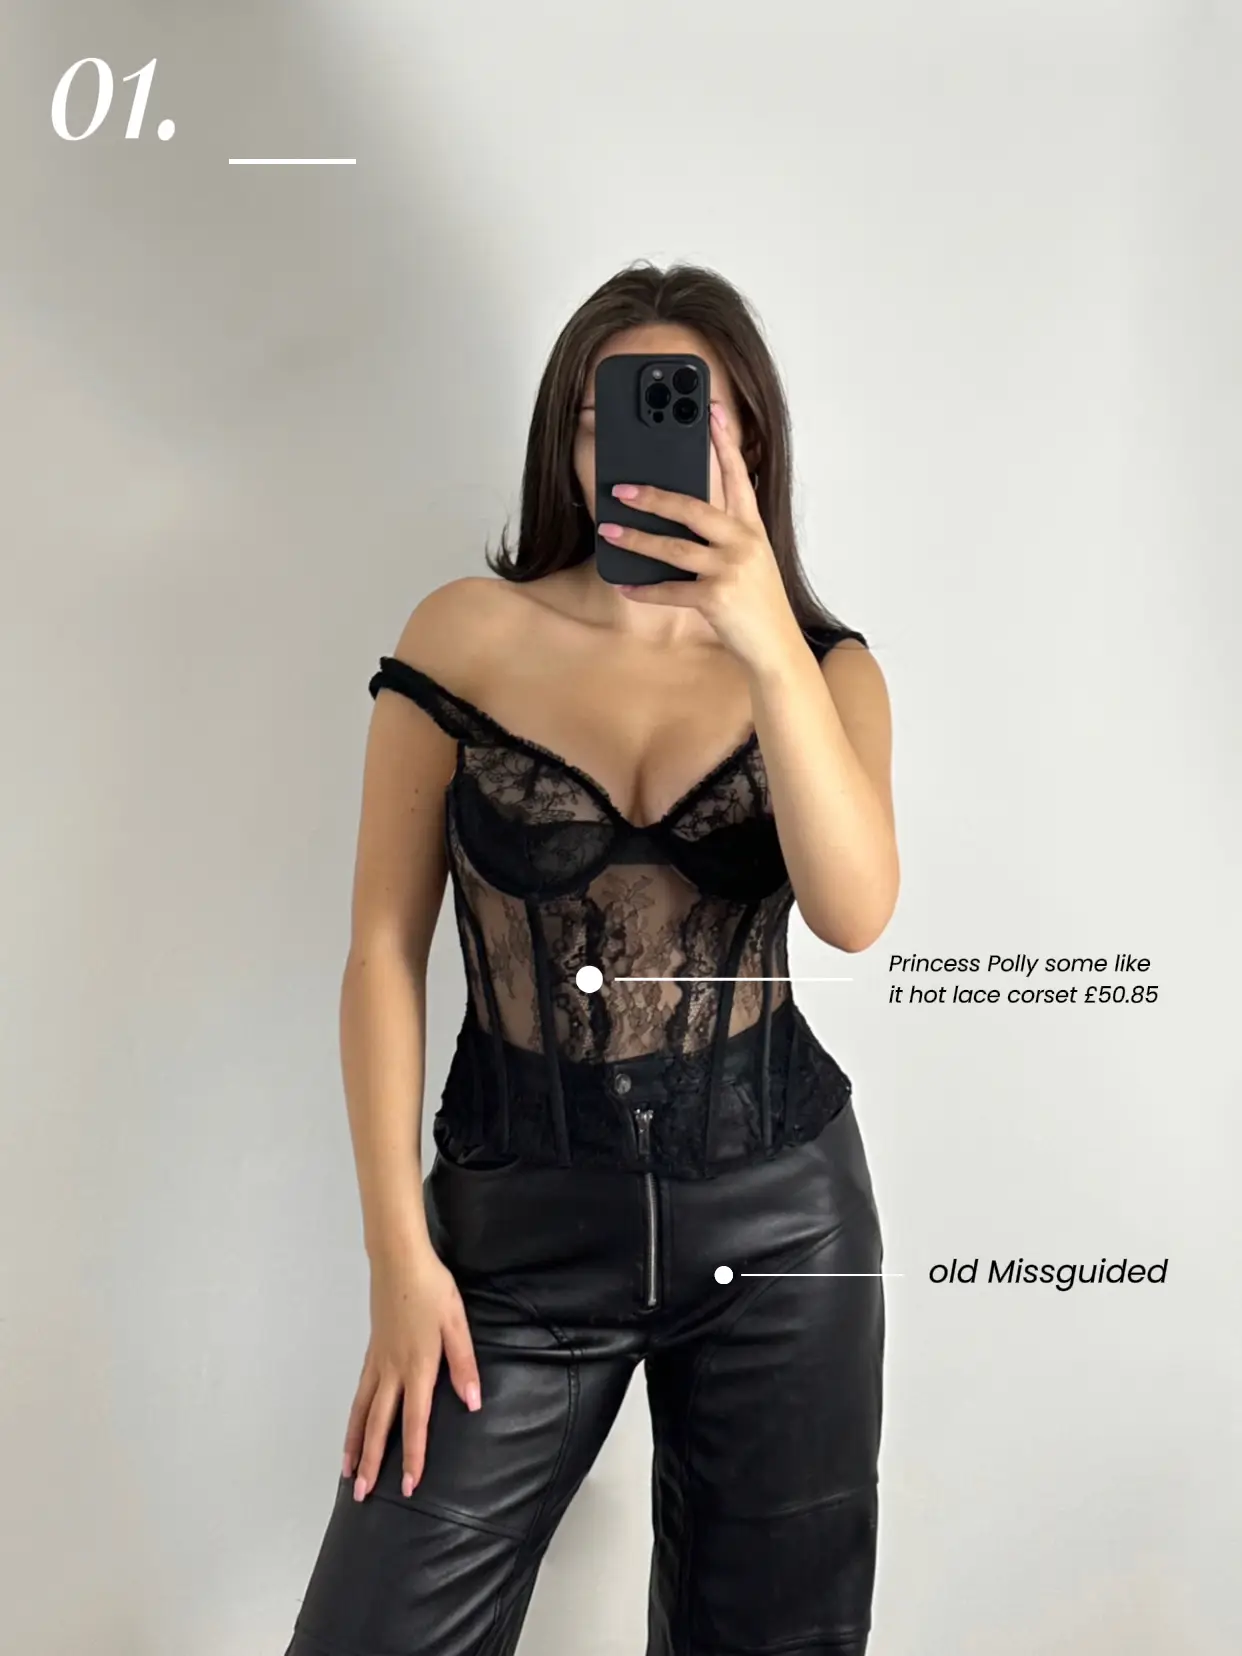 ✨ VIRAL PLT CORSETS ✨ I spoke about these a while ago and now they've